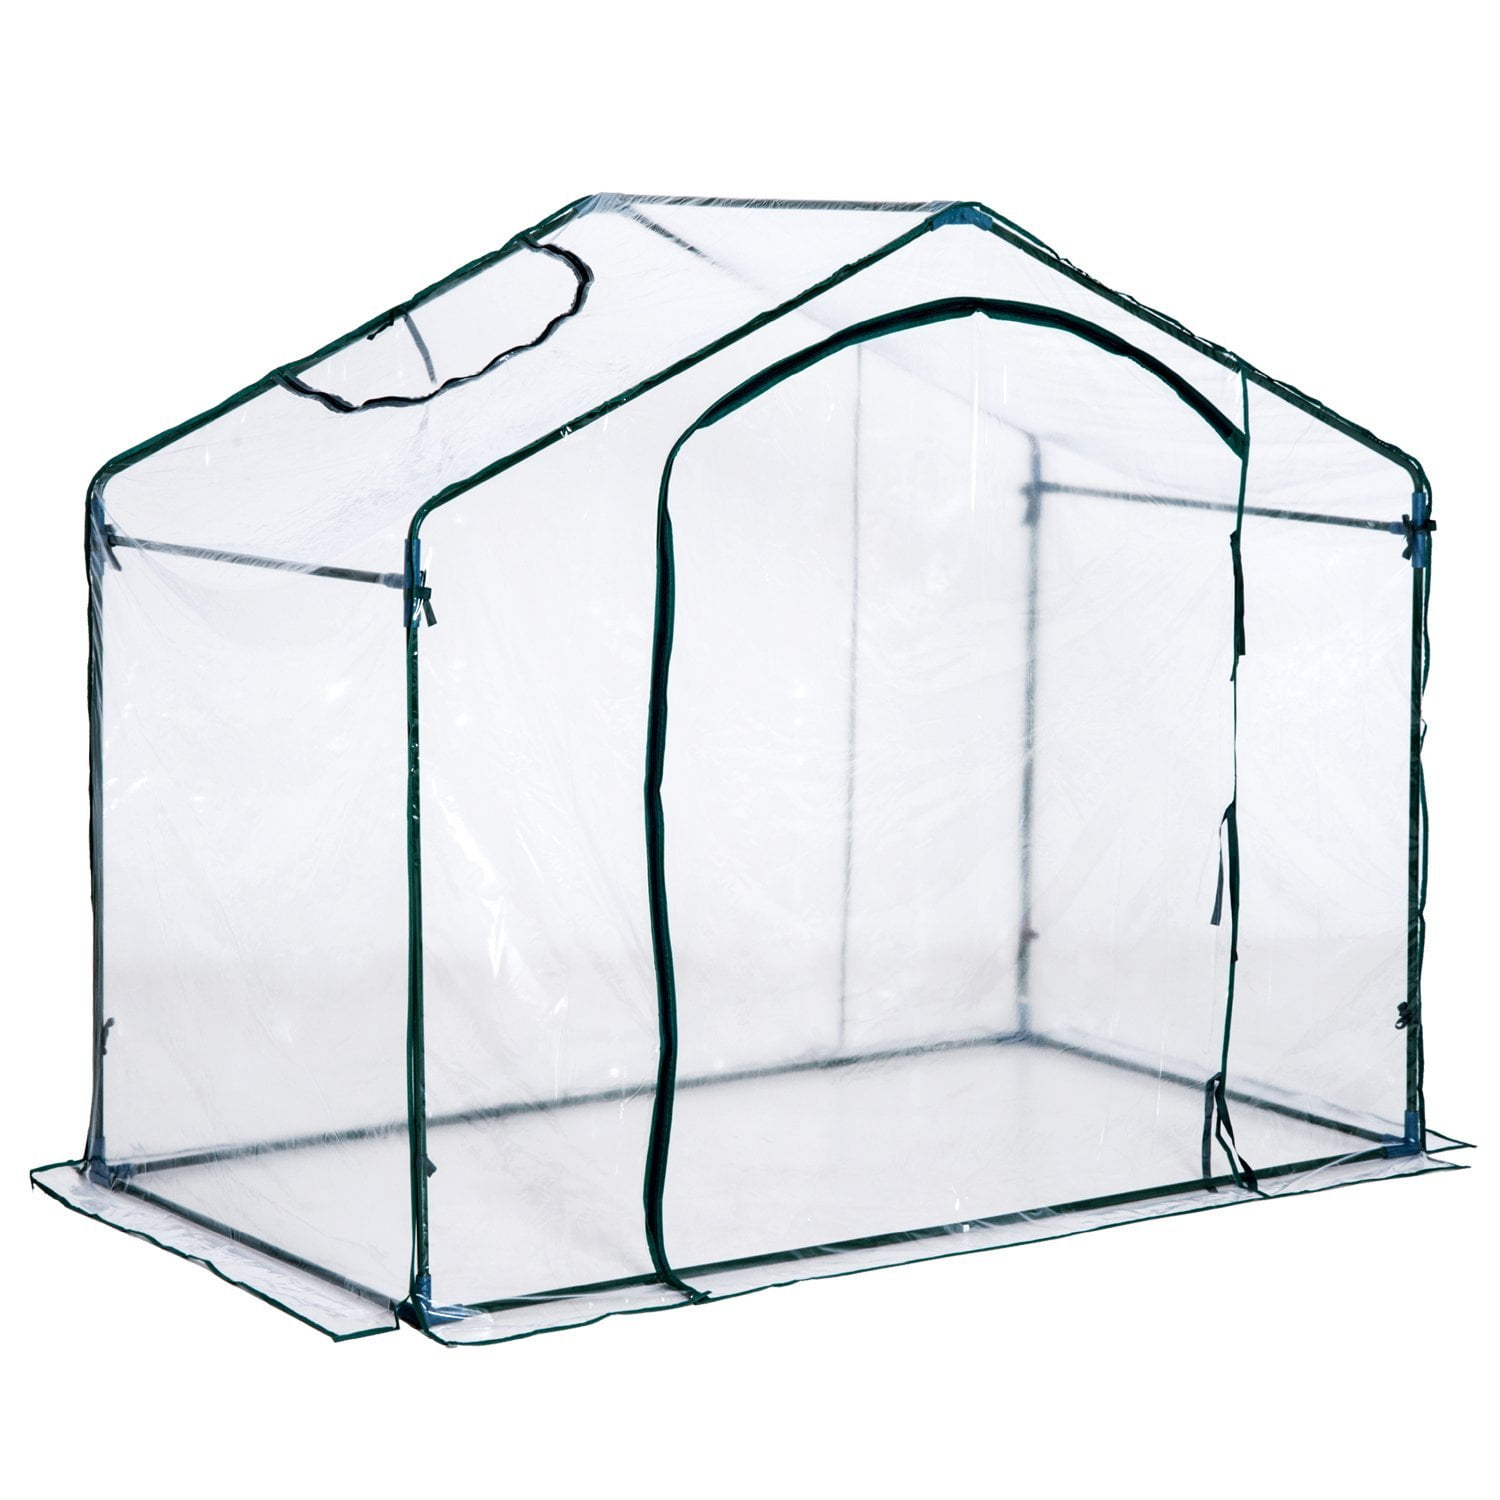 Outsunny 6' x 3.5' x 5' Outdoor Portable Walk-In Greenhouse with Clear PVC Cover